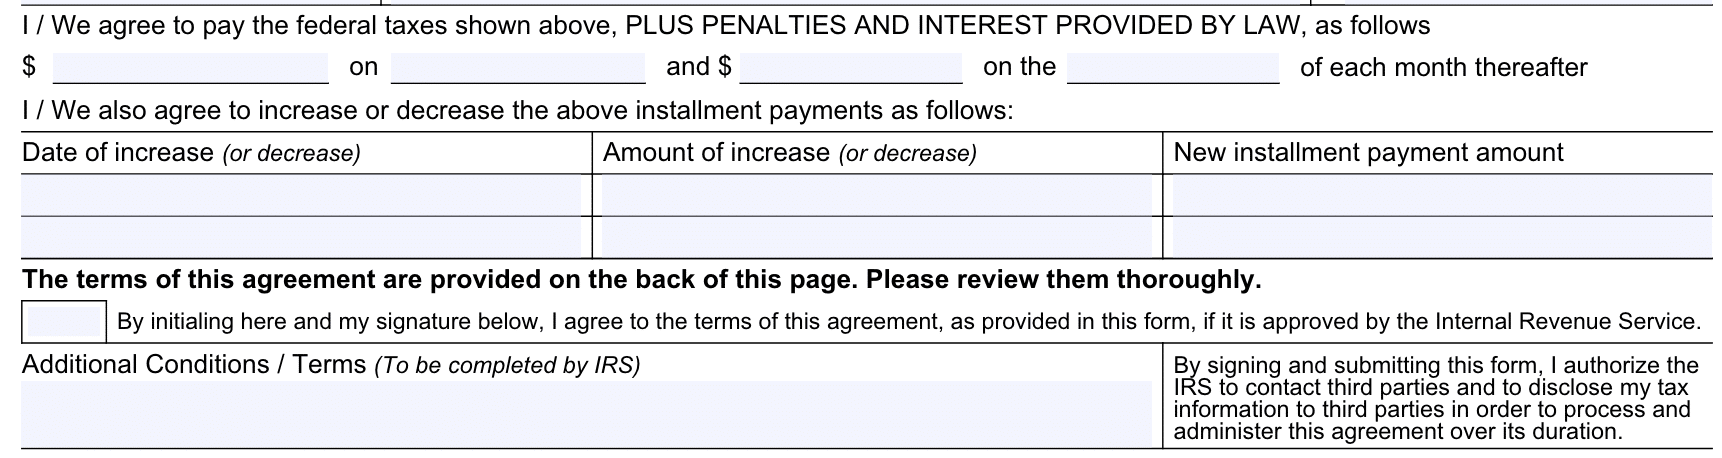 IRS Form 433-D